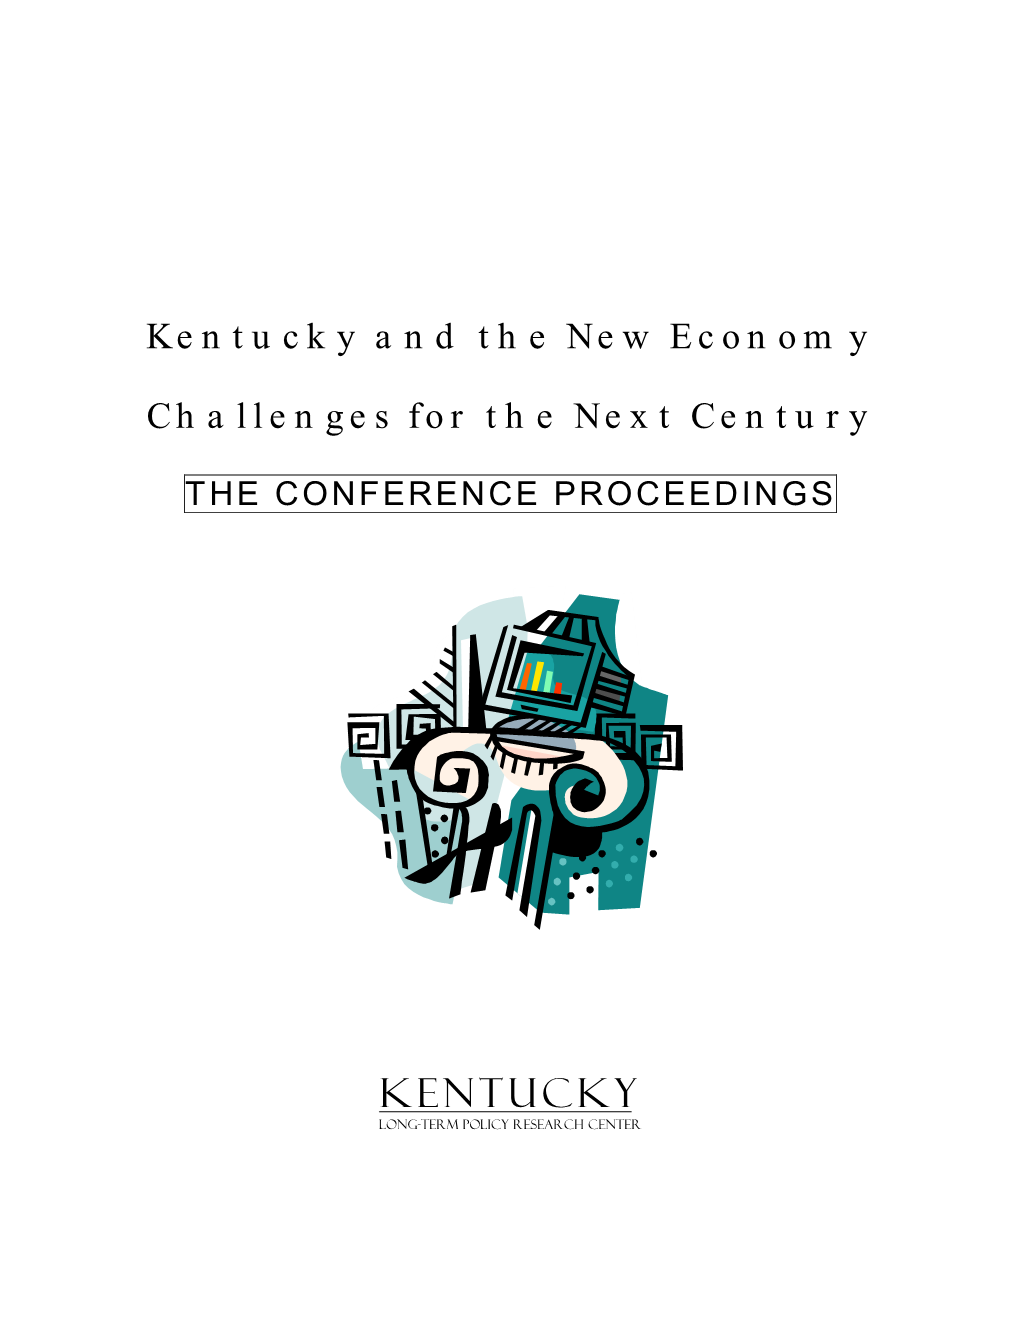 Kentucky and the New Economy/Challenges for the Next